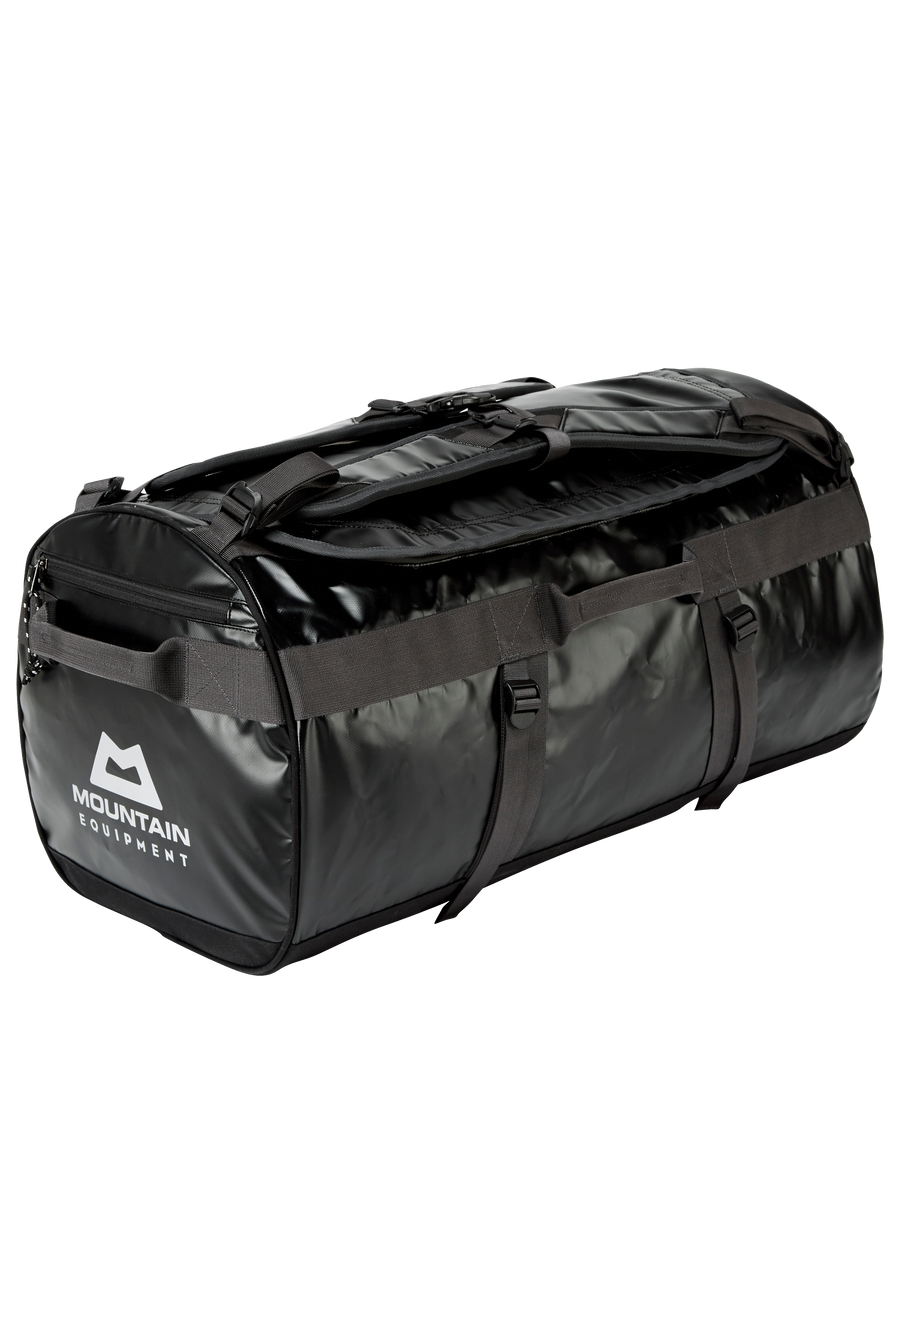 Unlock Wilderness' choice in the Mountain Equipment Vs North Face comparison, the Wet & Dry Kitbag by Mountain Equipment